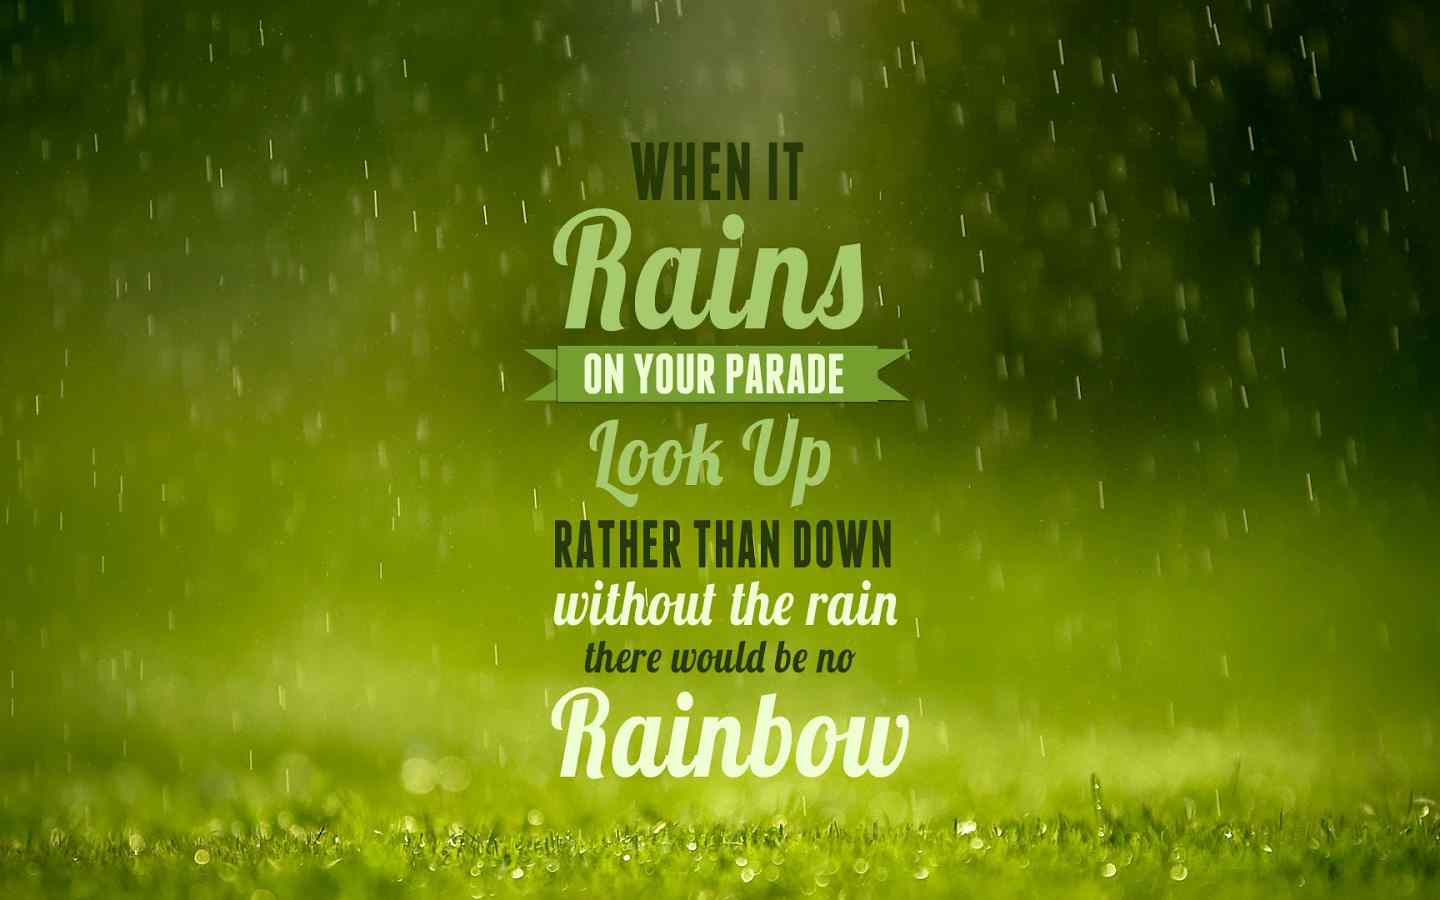 Best Happy Rainy Day Sayings, Quotes, Captions and Images